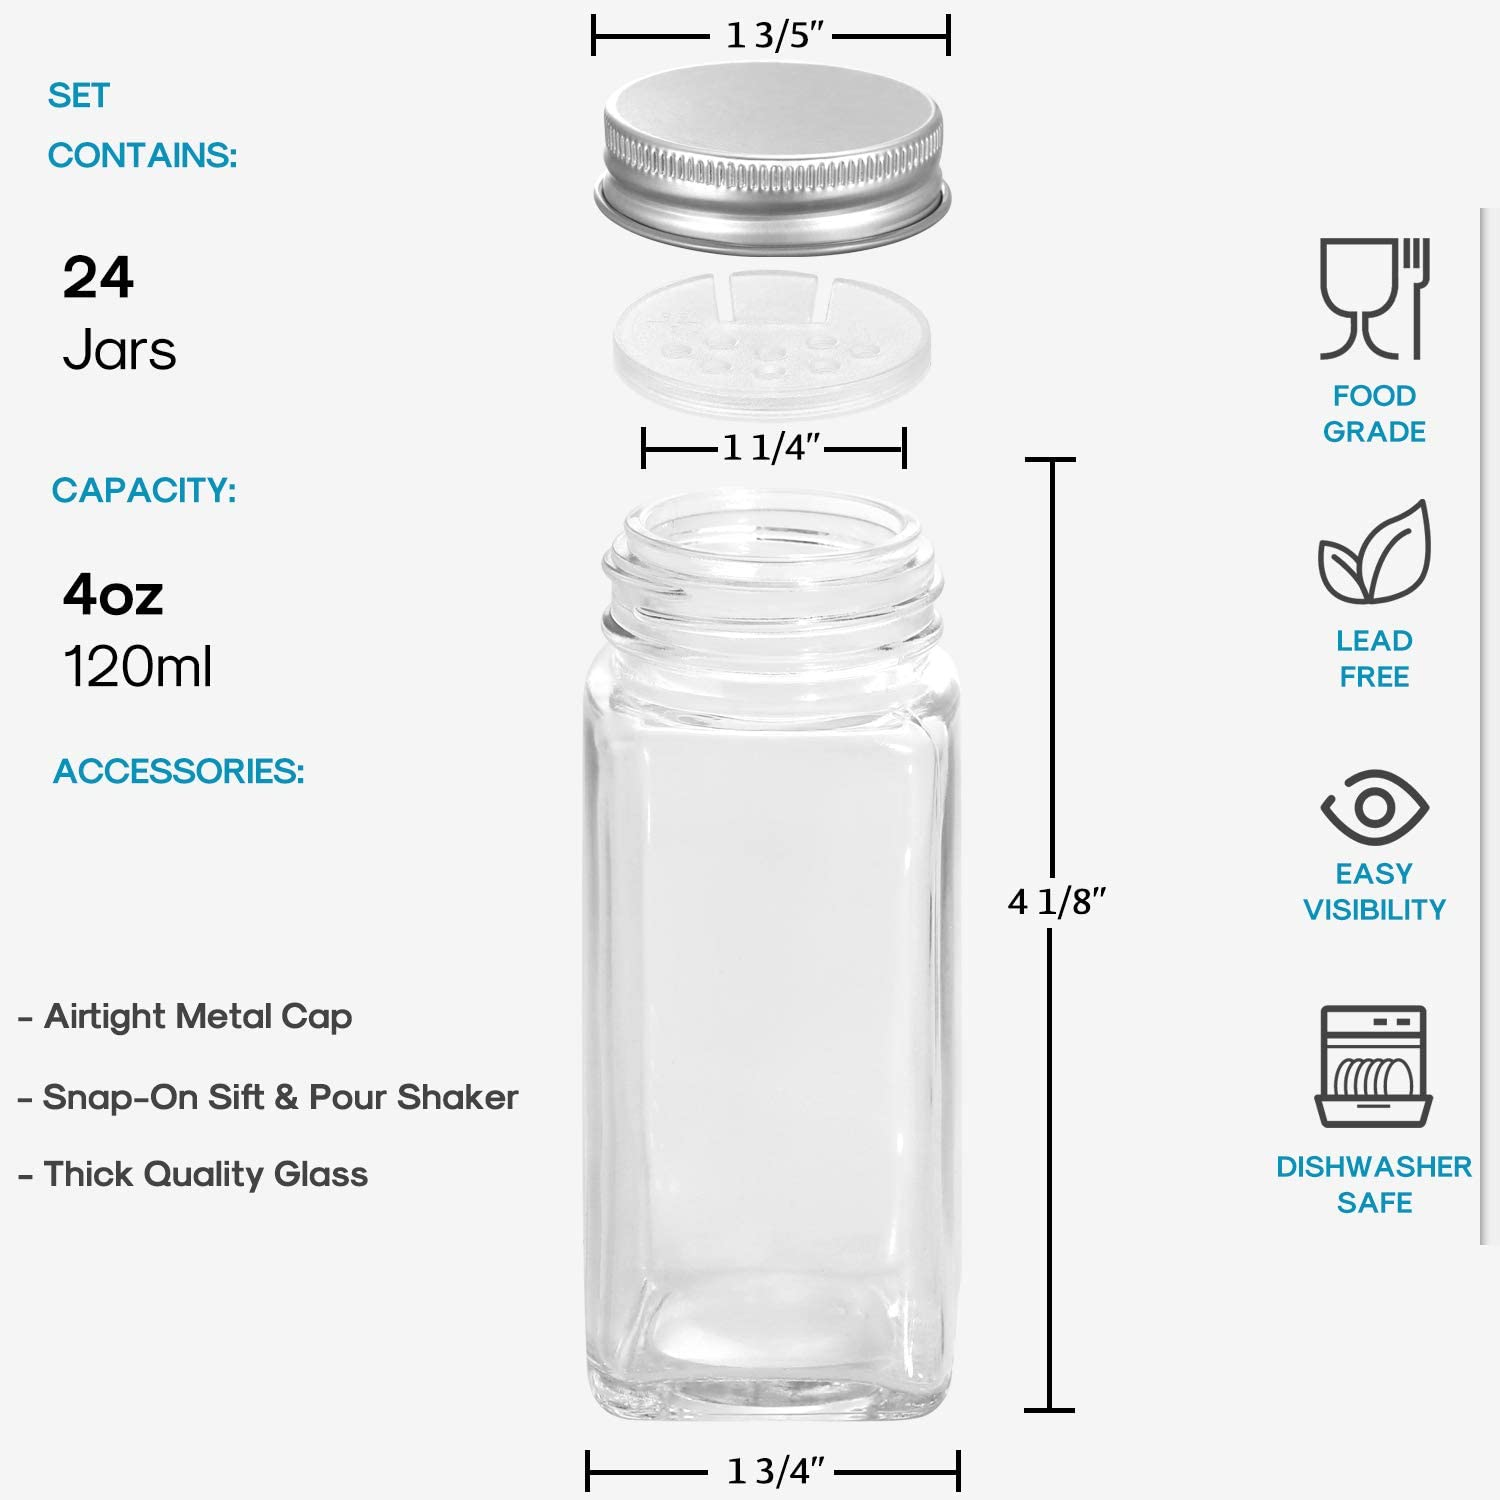 24 Pcs, 4oz Glass Spice Jars/Bottles With Spice Labels, Shaker Lids & Airtight Metal Caps - Silicone Collapsible Funnel Included